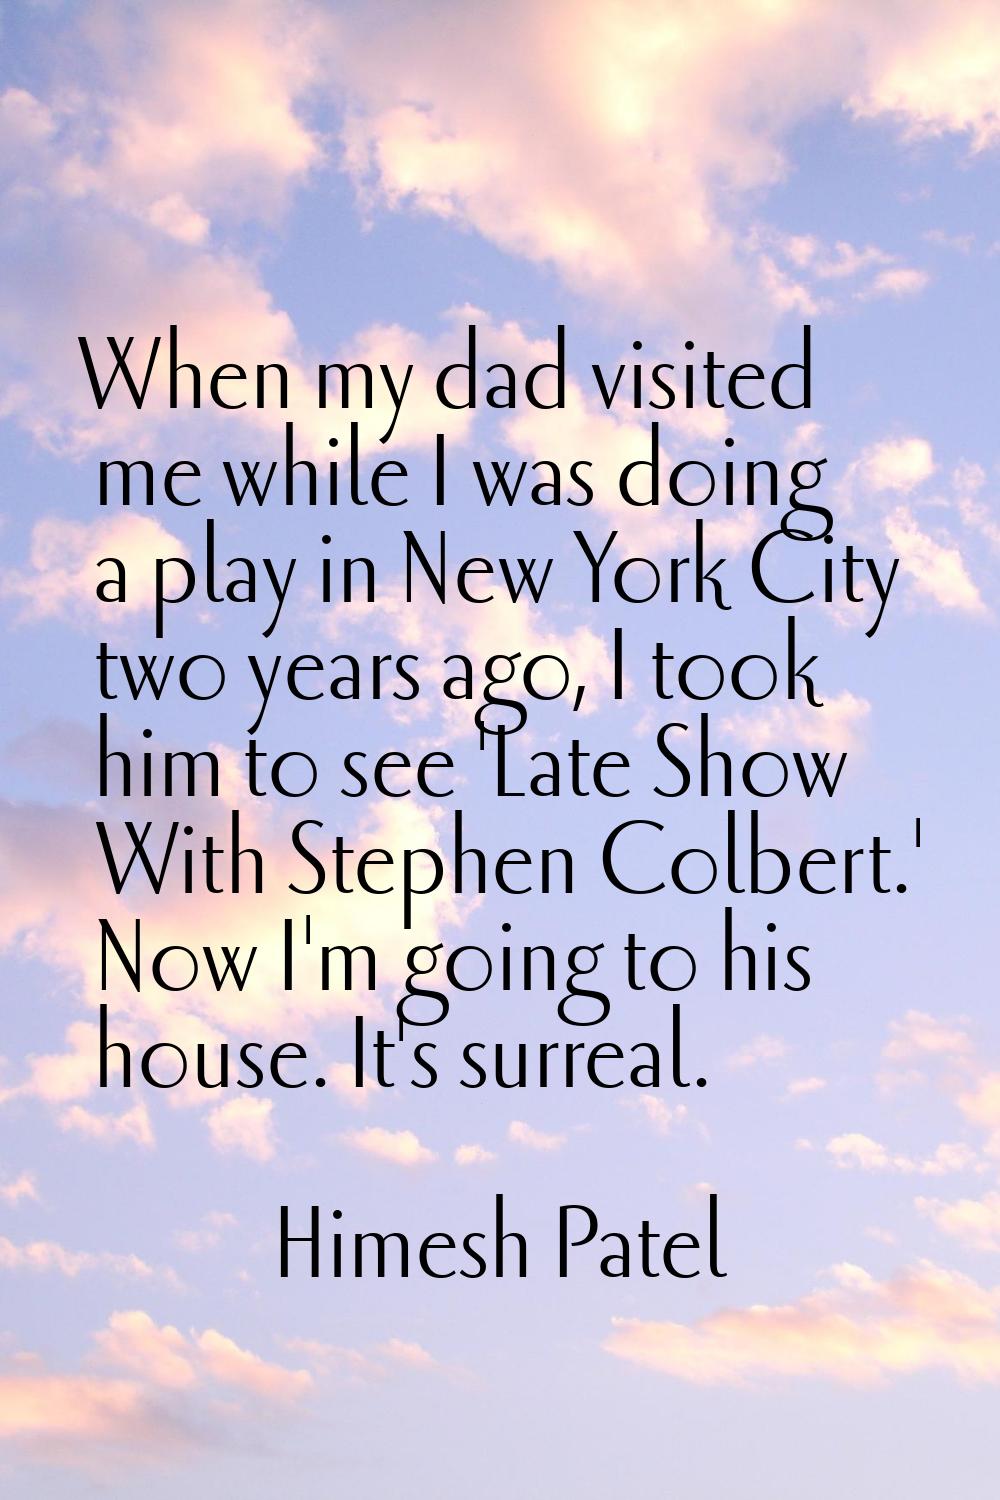 When my dad visited me while I was doing a play in New York City two years ago, I took him to see '